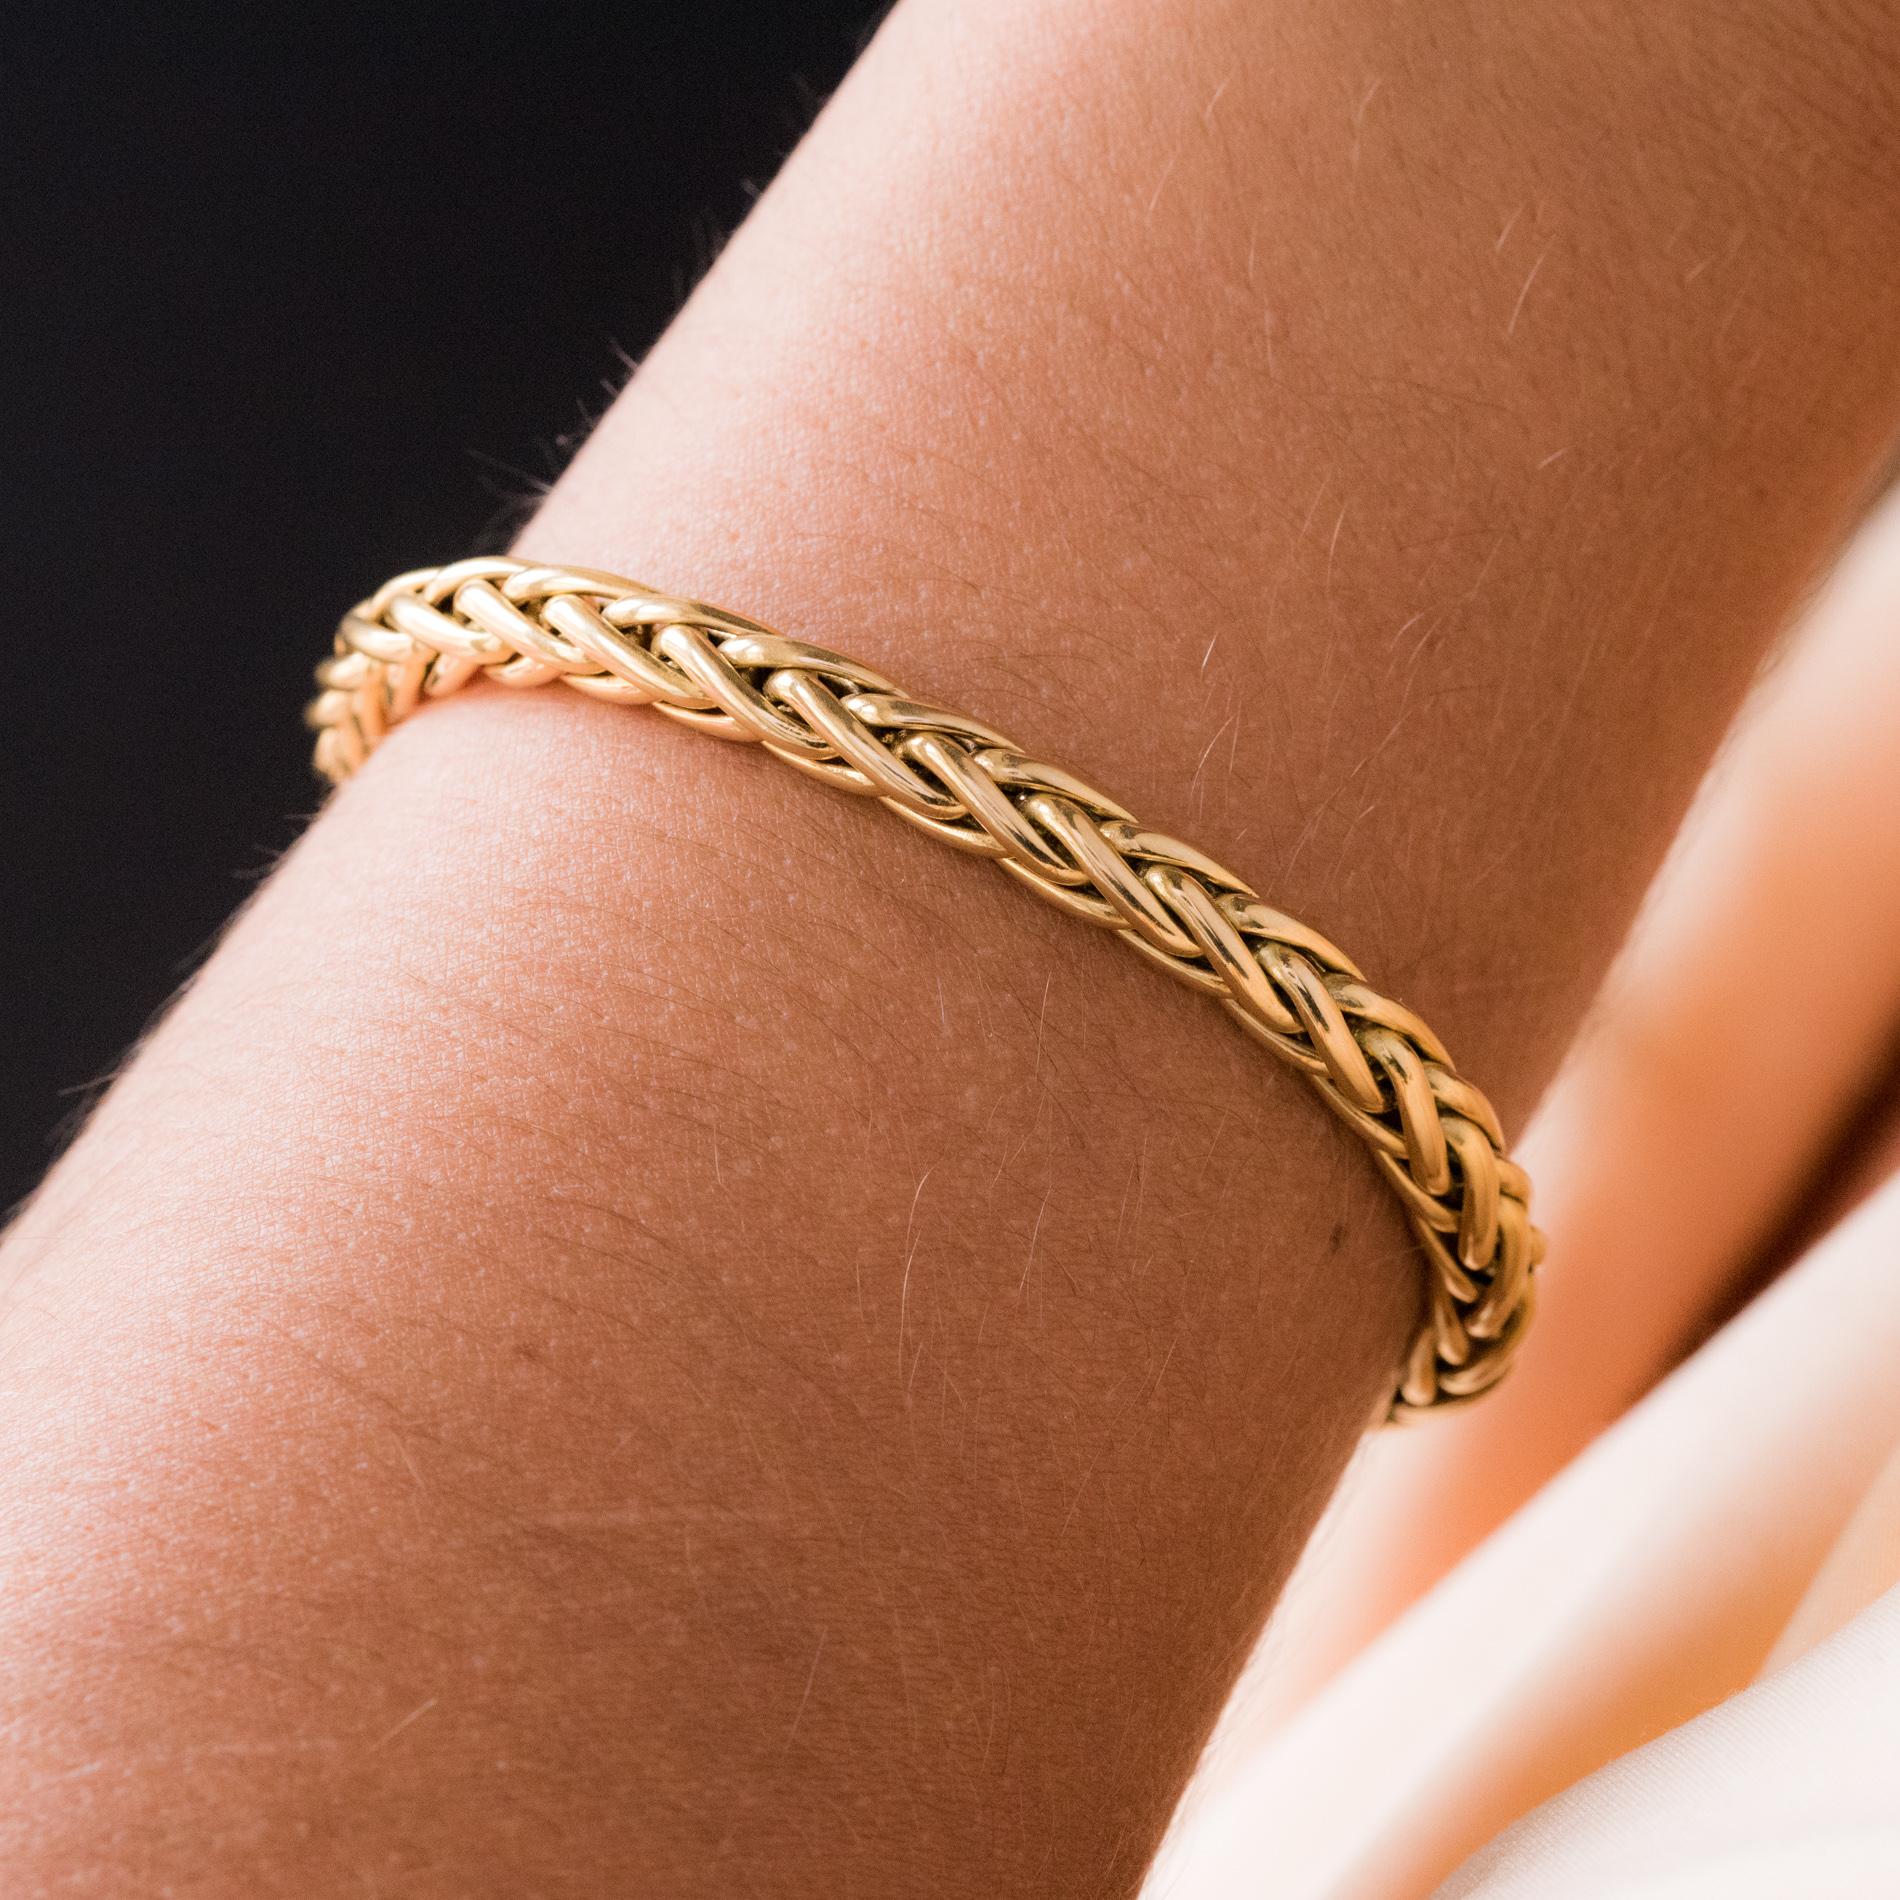 Bracelet in 18K yellow gold, eagle's head hallmark.
This timeless gold bracelet is made of a palm tree mesh. The clasp is a ratchet with a safety 